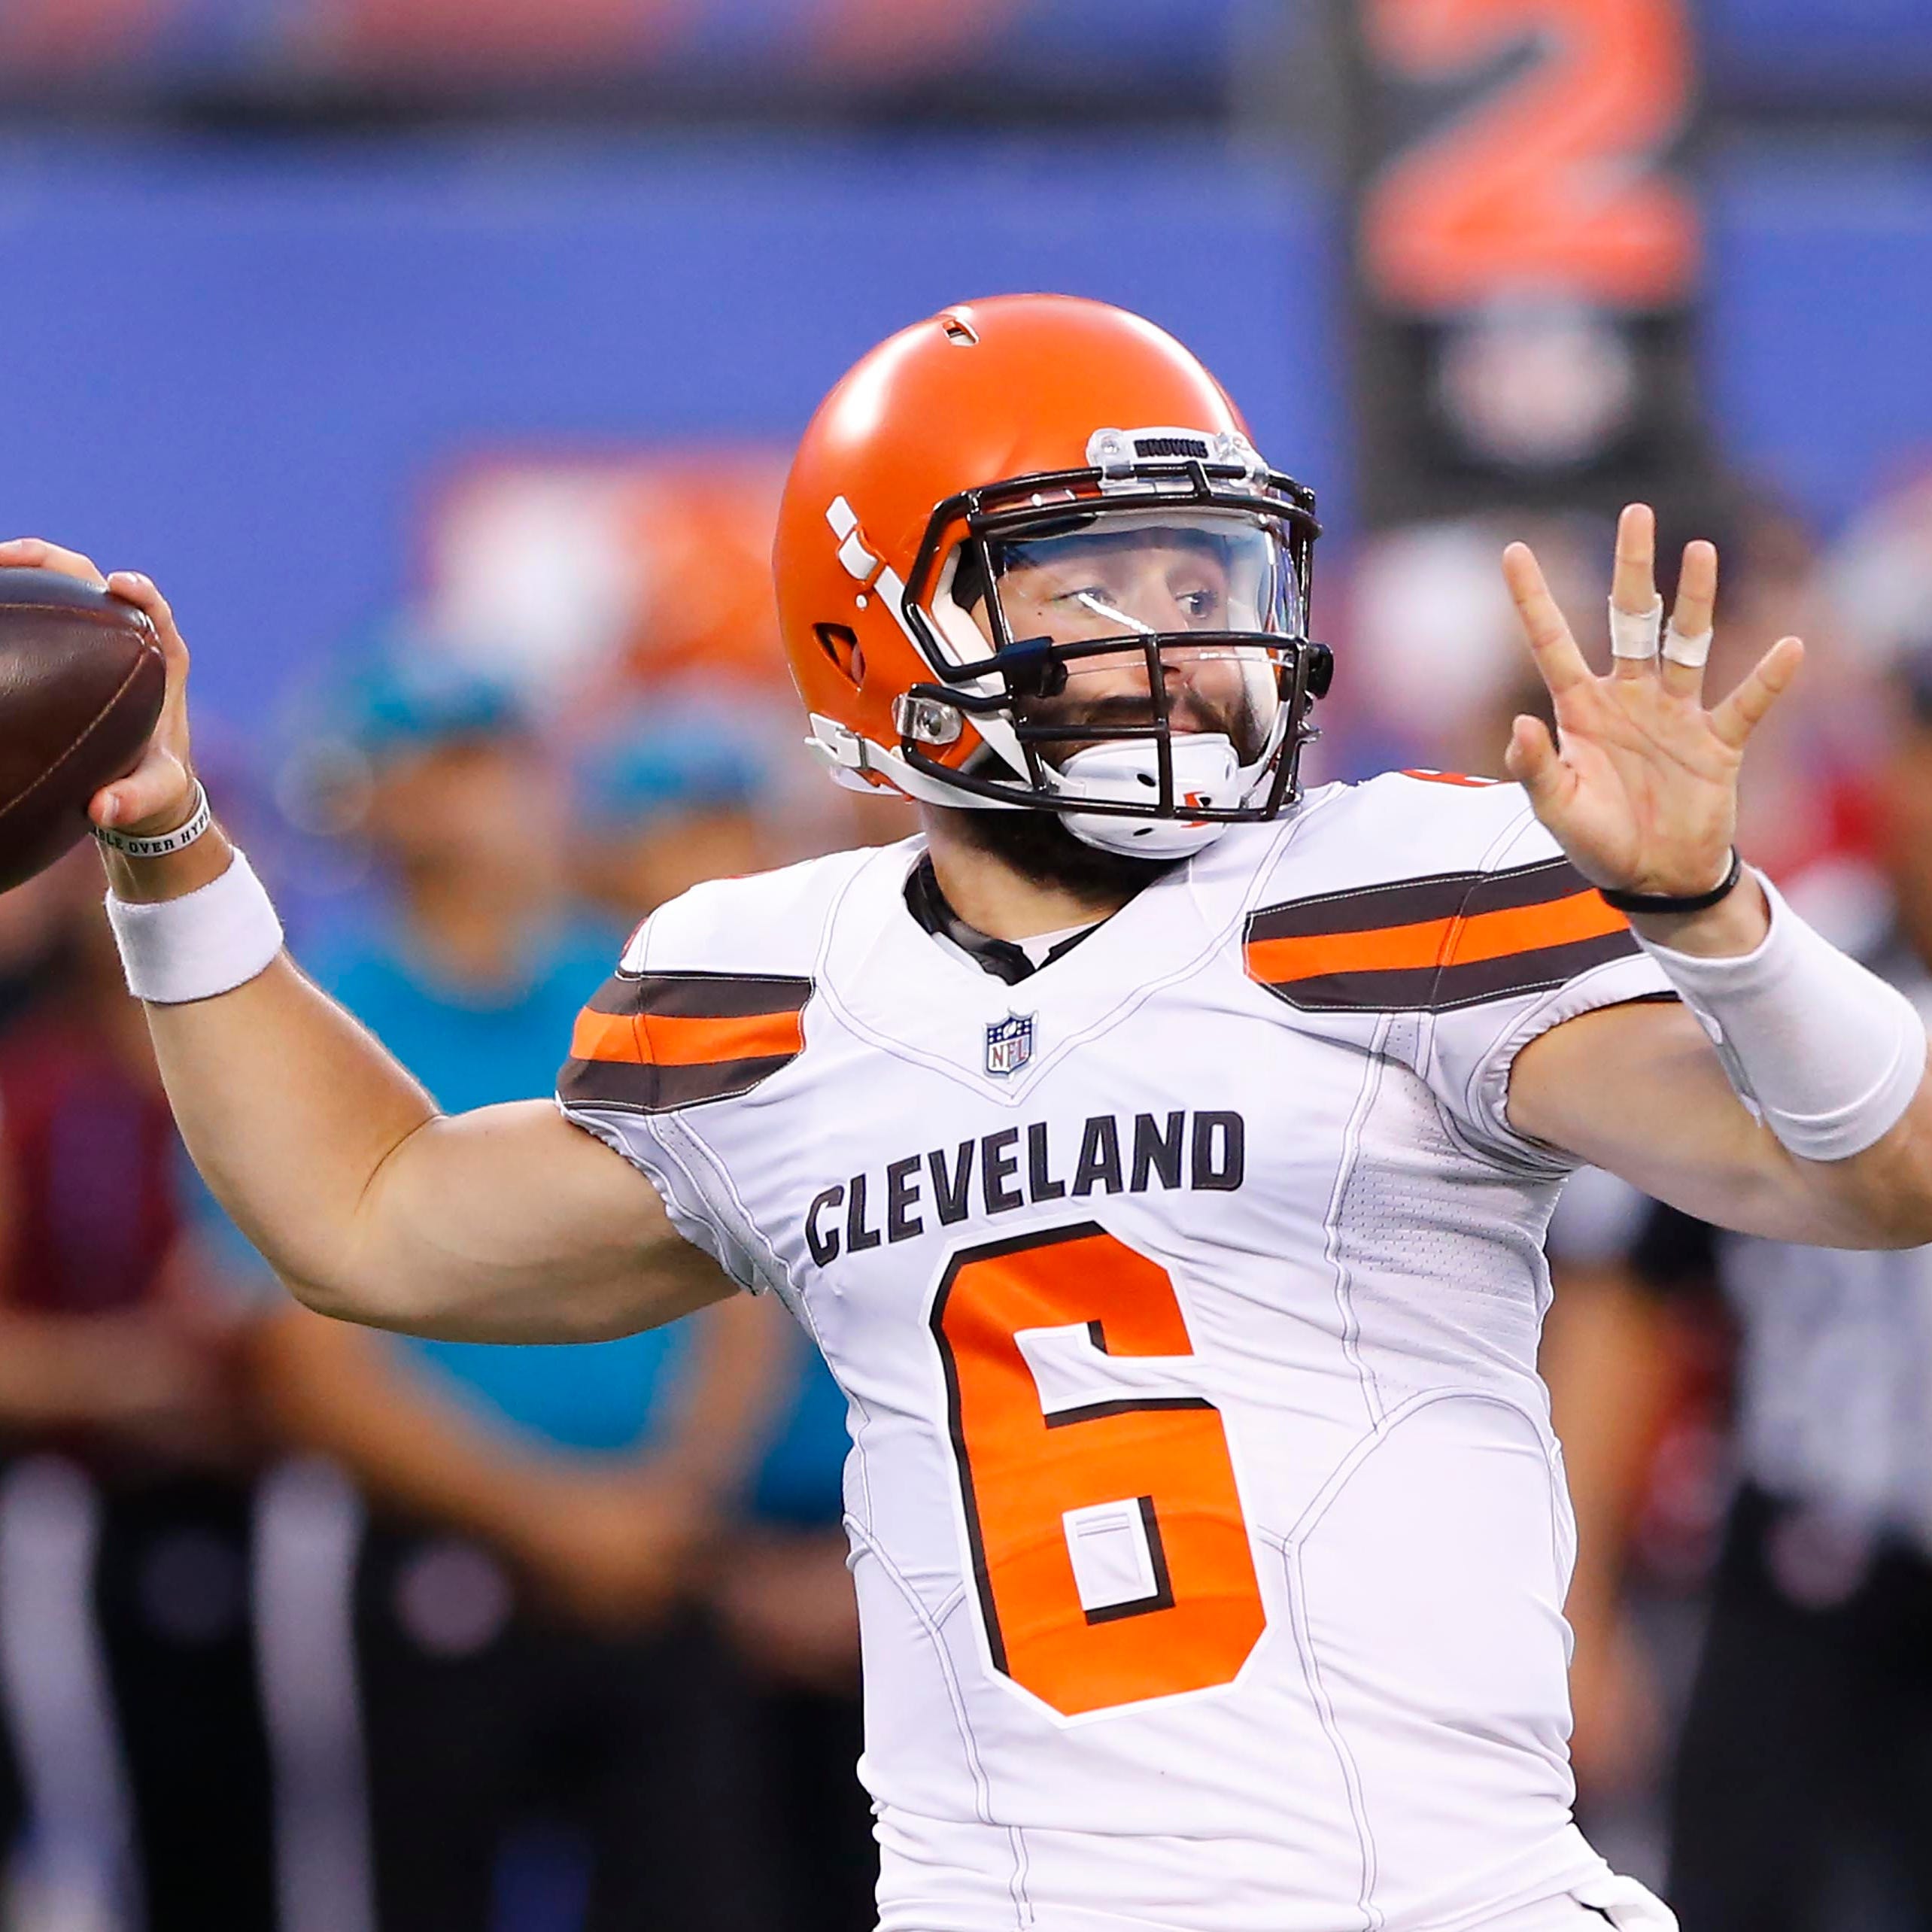 Baker Mayfield made his Browns debut in the preseason opener against the Giants.